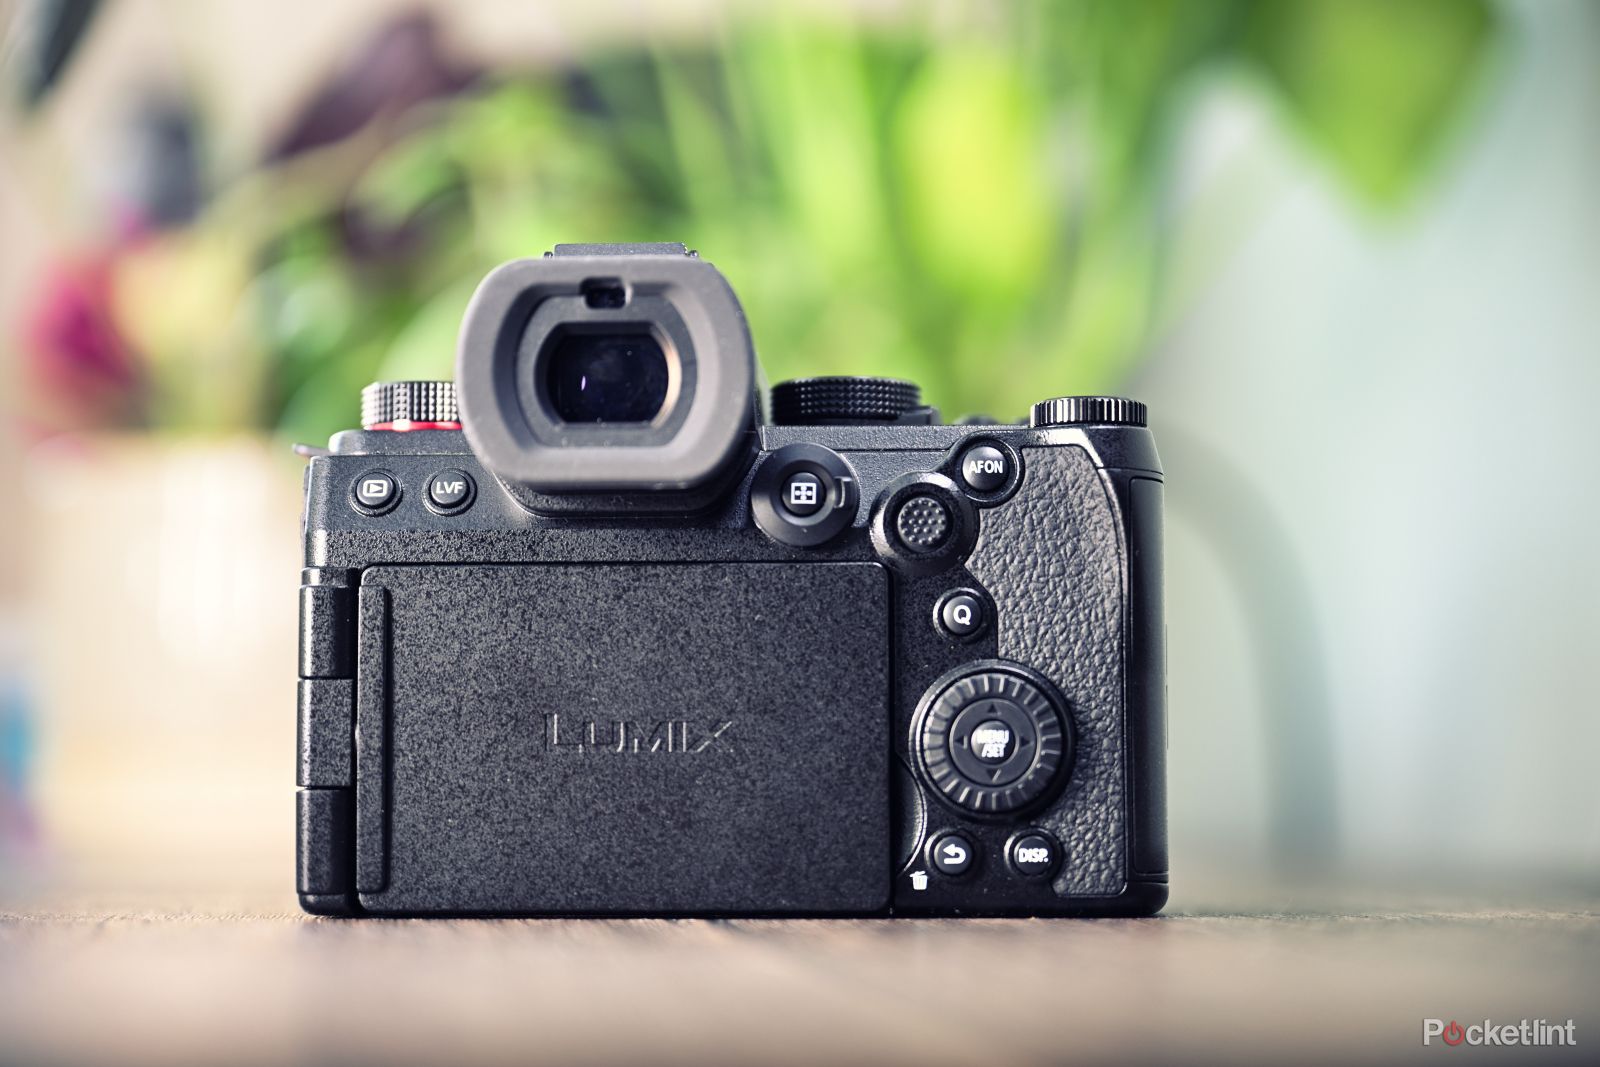 Panasonic G9 II review: Its best Micro Four Thirds camera to date